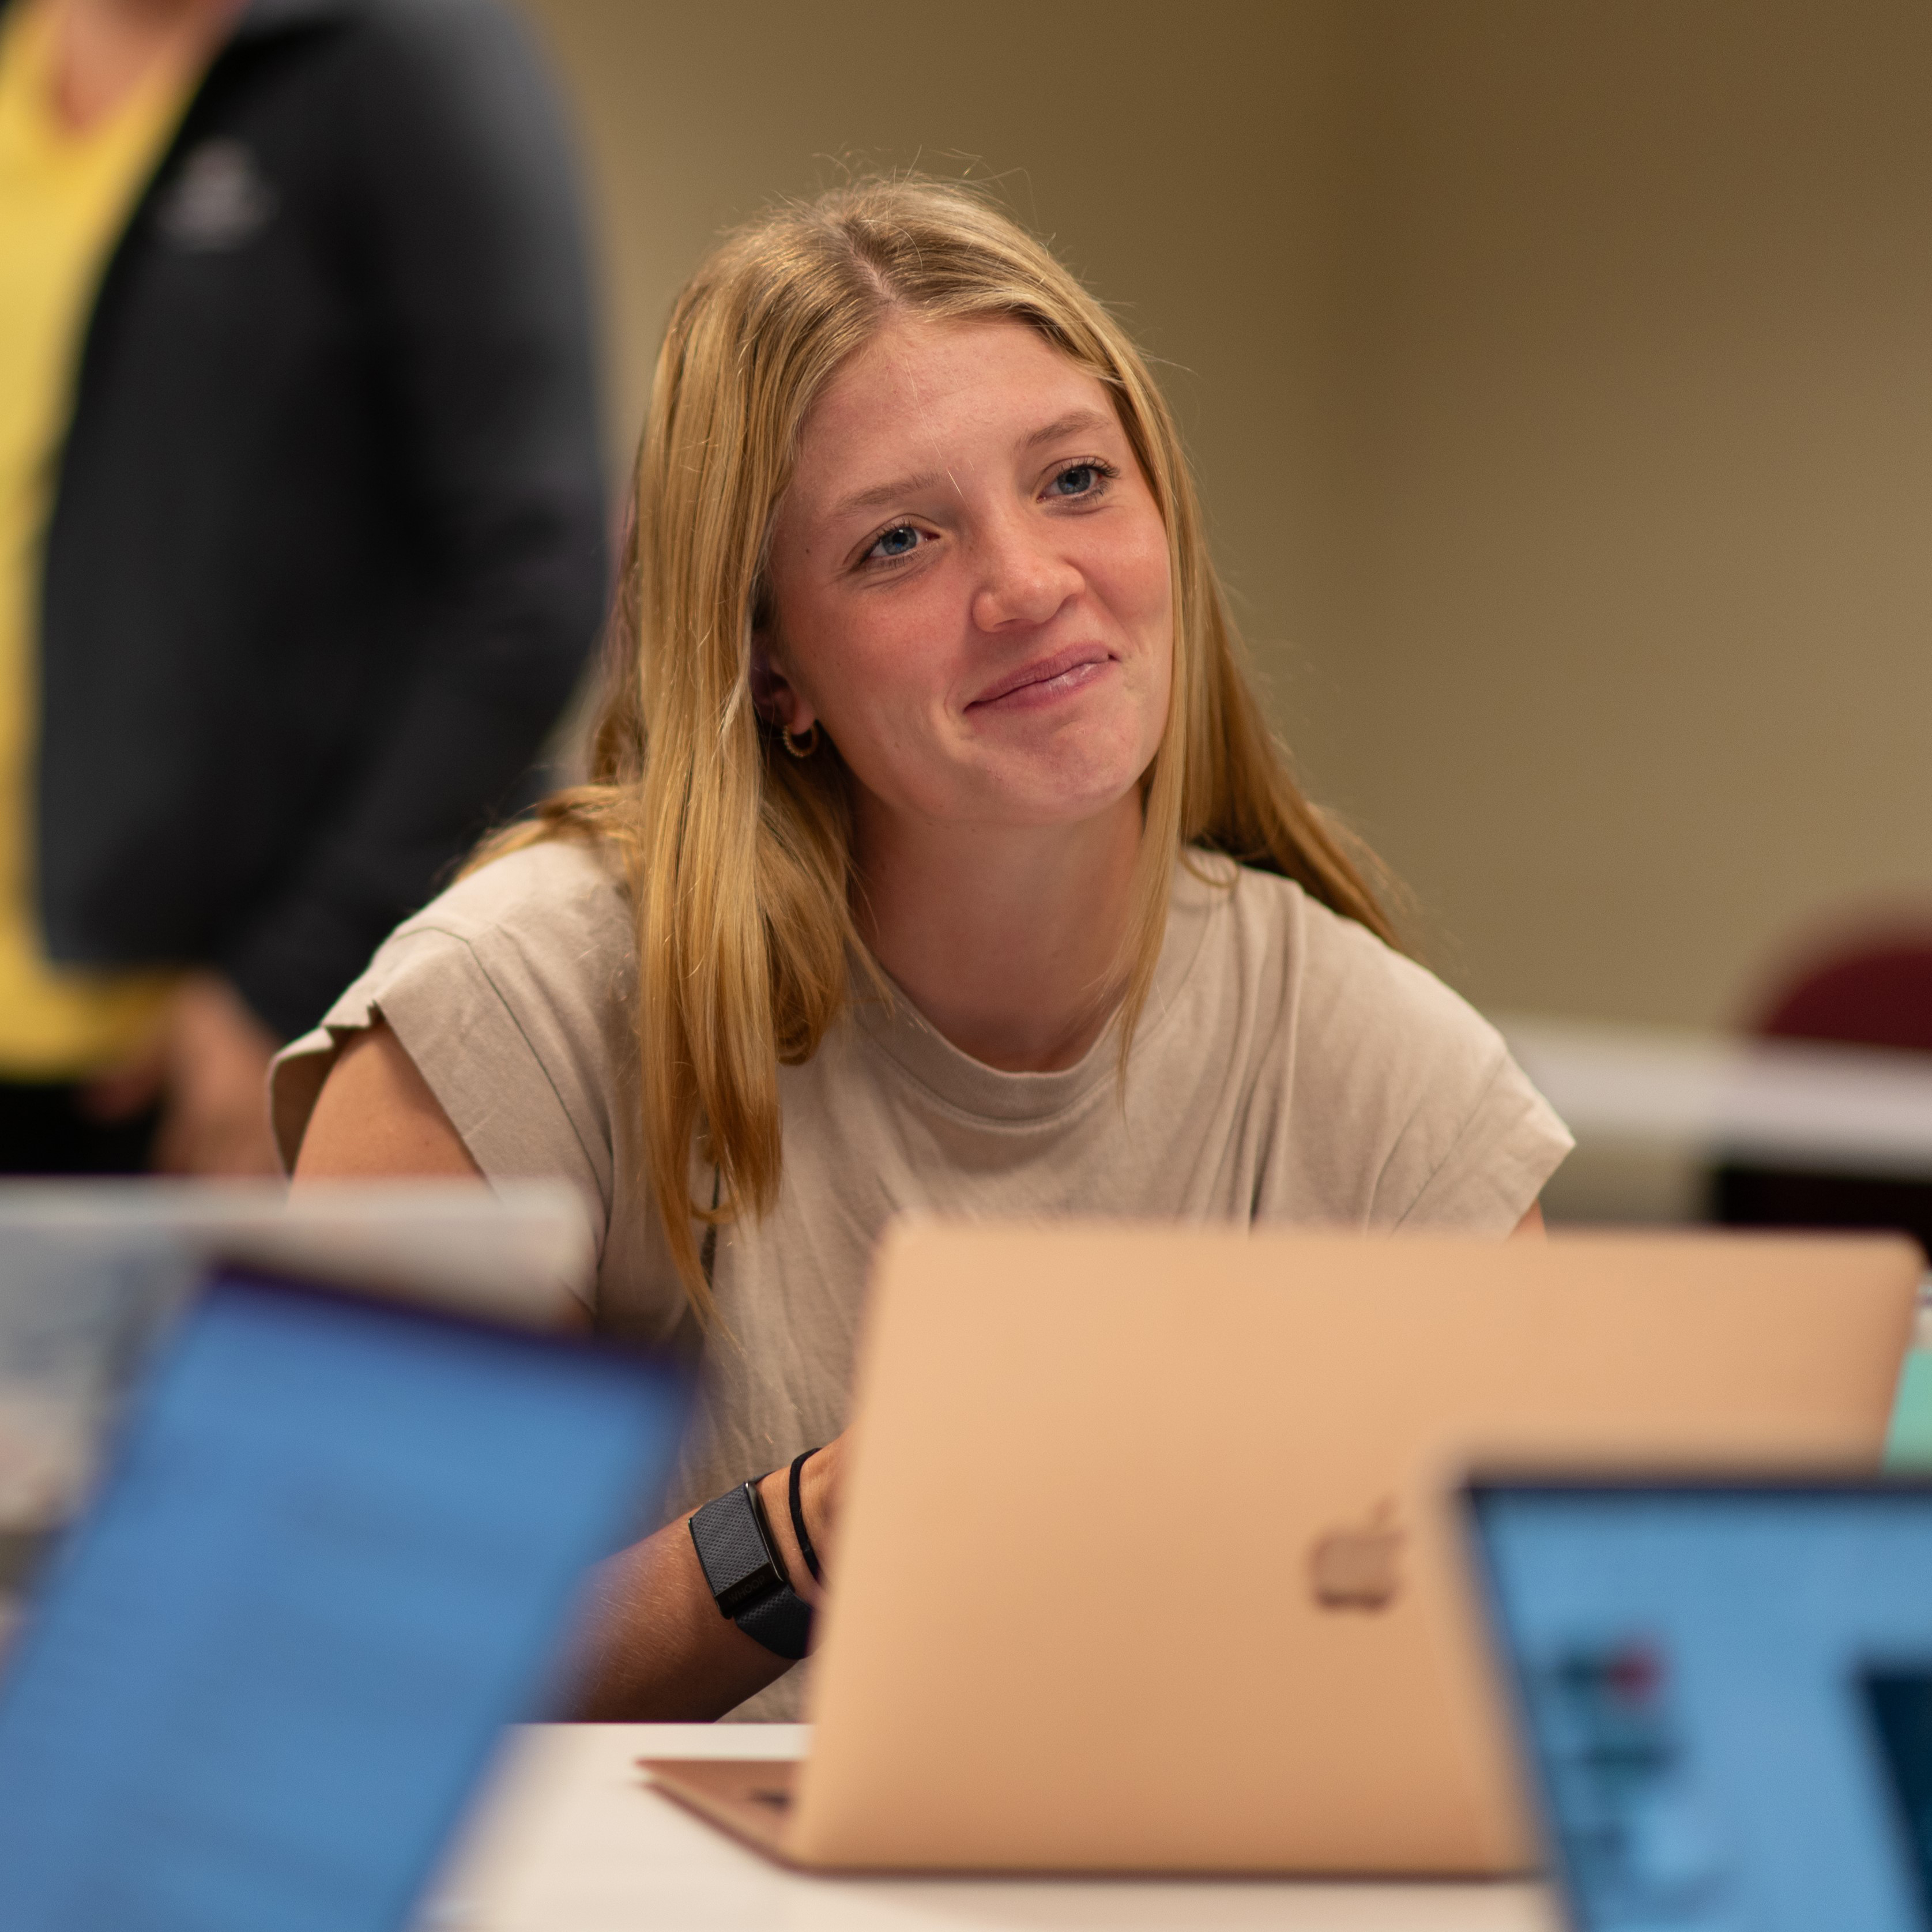 Female student looks up from her computer